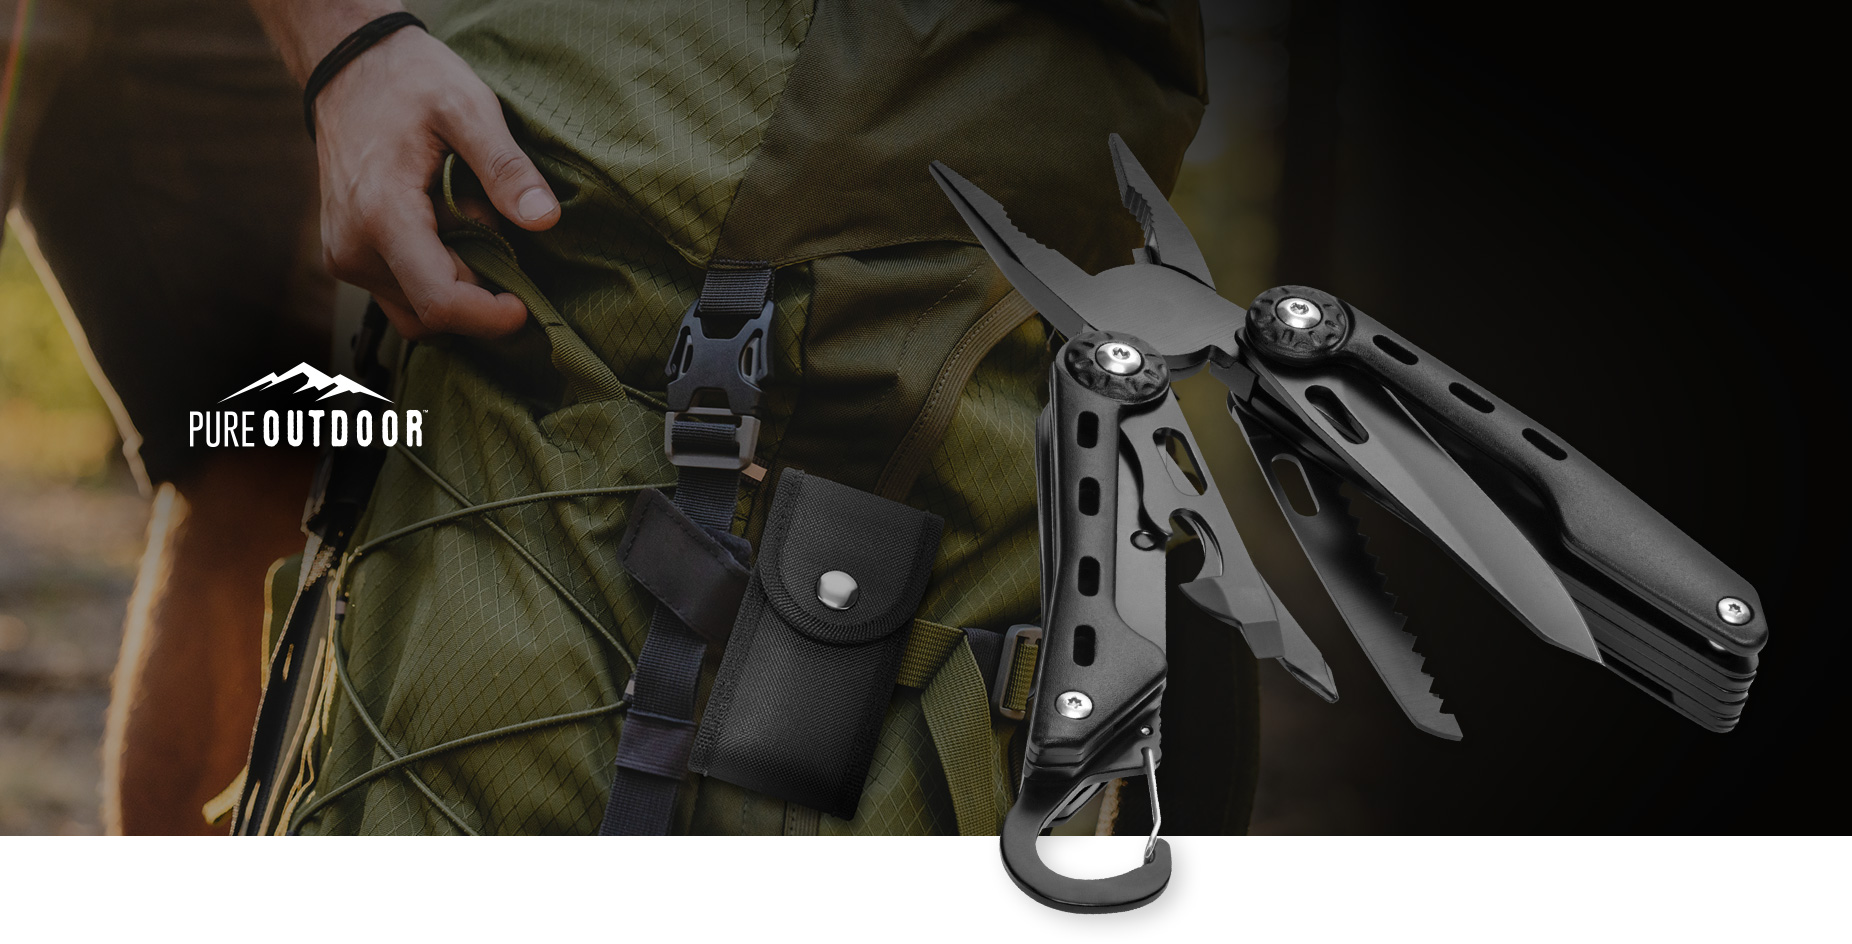 Pure Outdoor 10-in-1 Multi-Functional Pliers